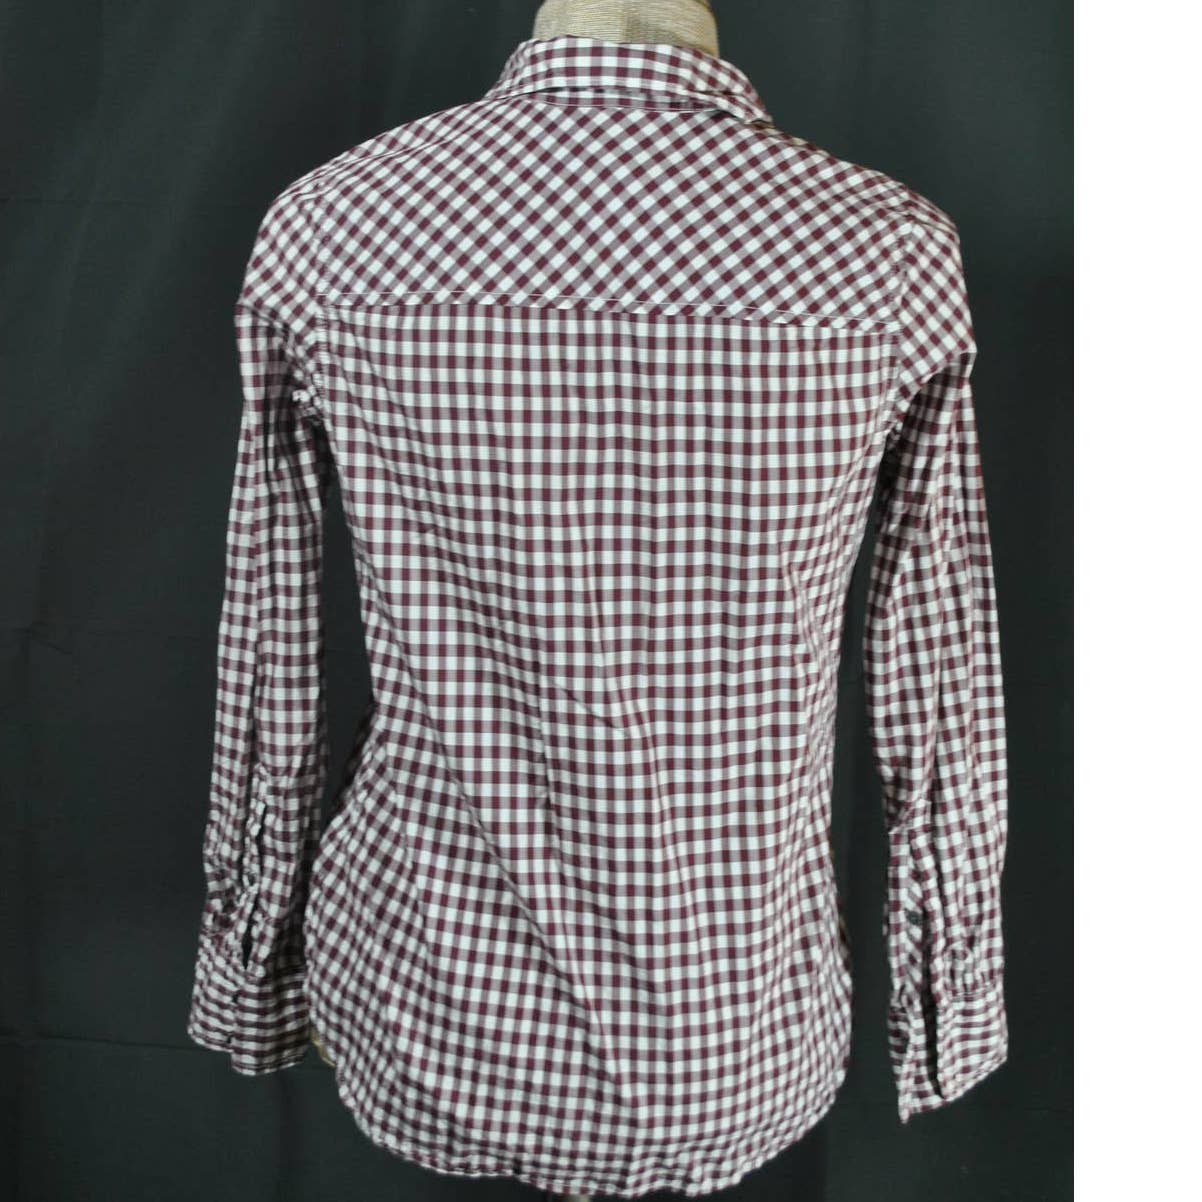 J.Crew Brown White Gingham Button Up Top - 2